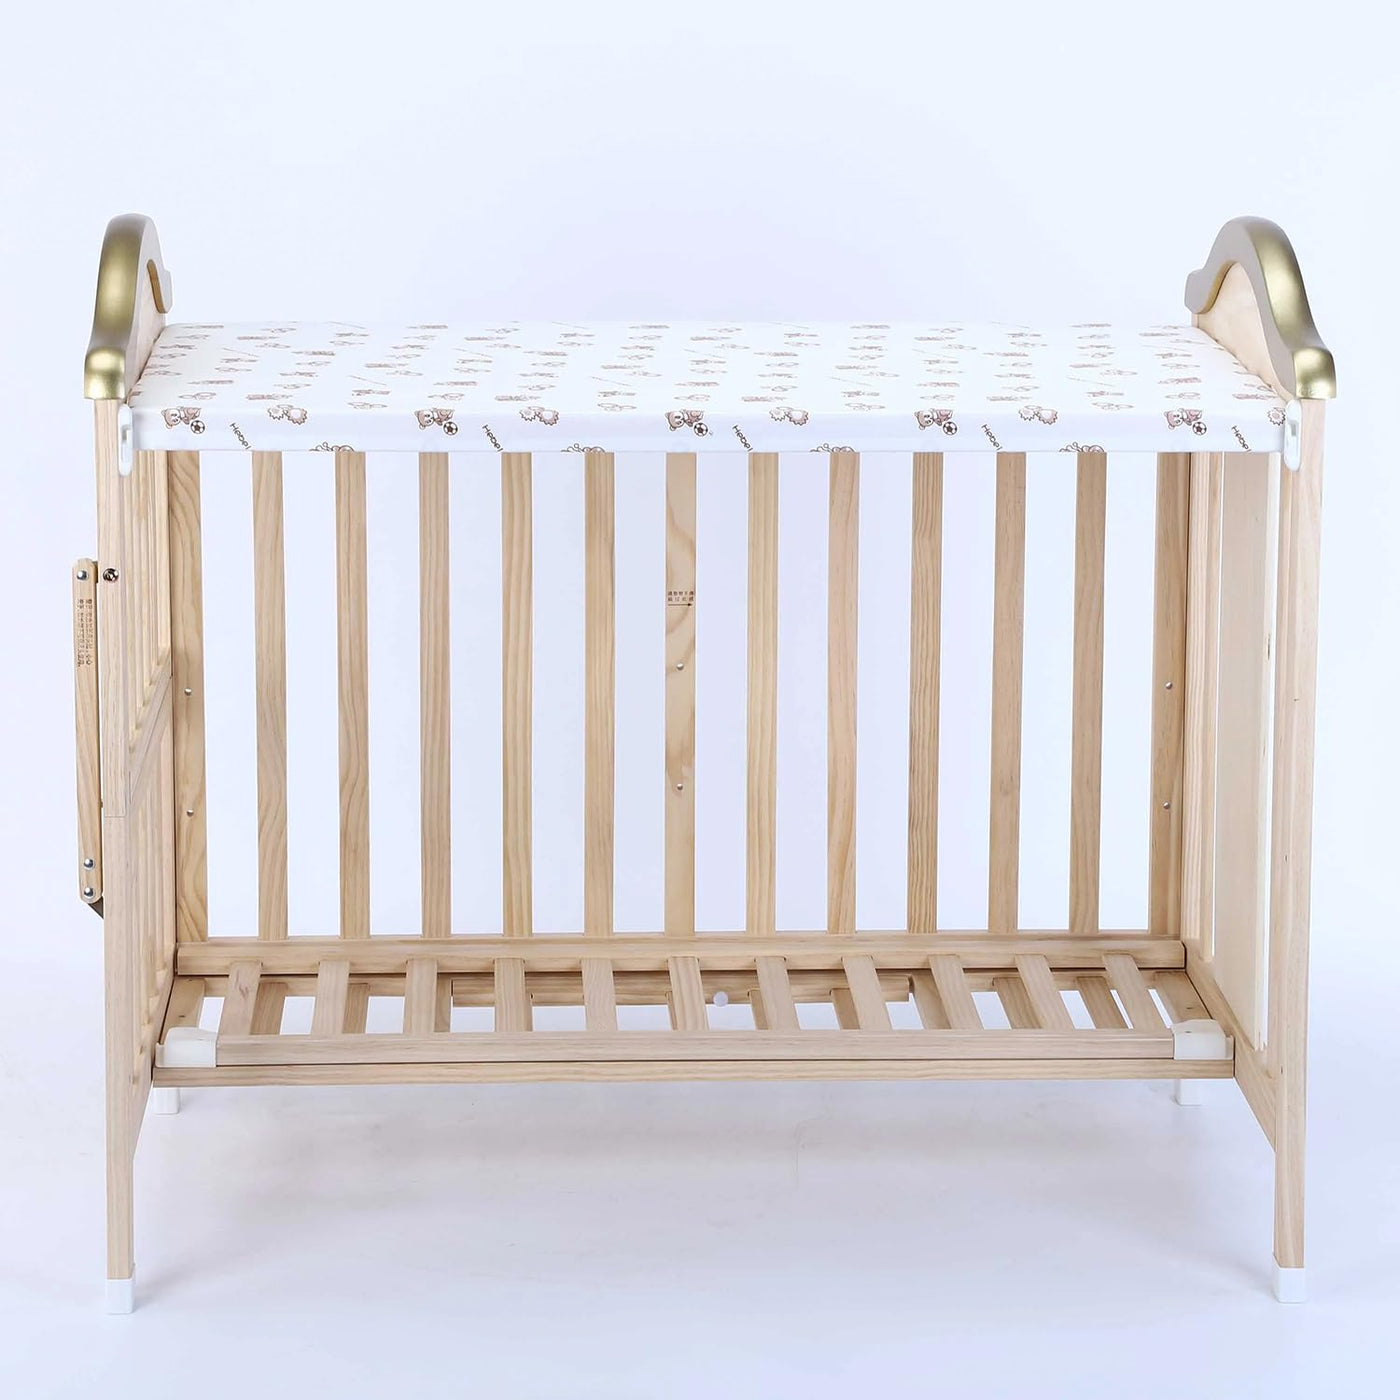 9 in 1 Convertible Baby Crib Bamboo Cot (Beige)